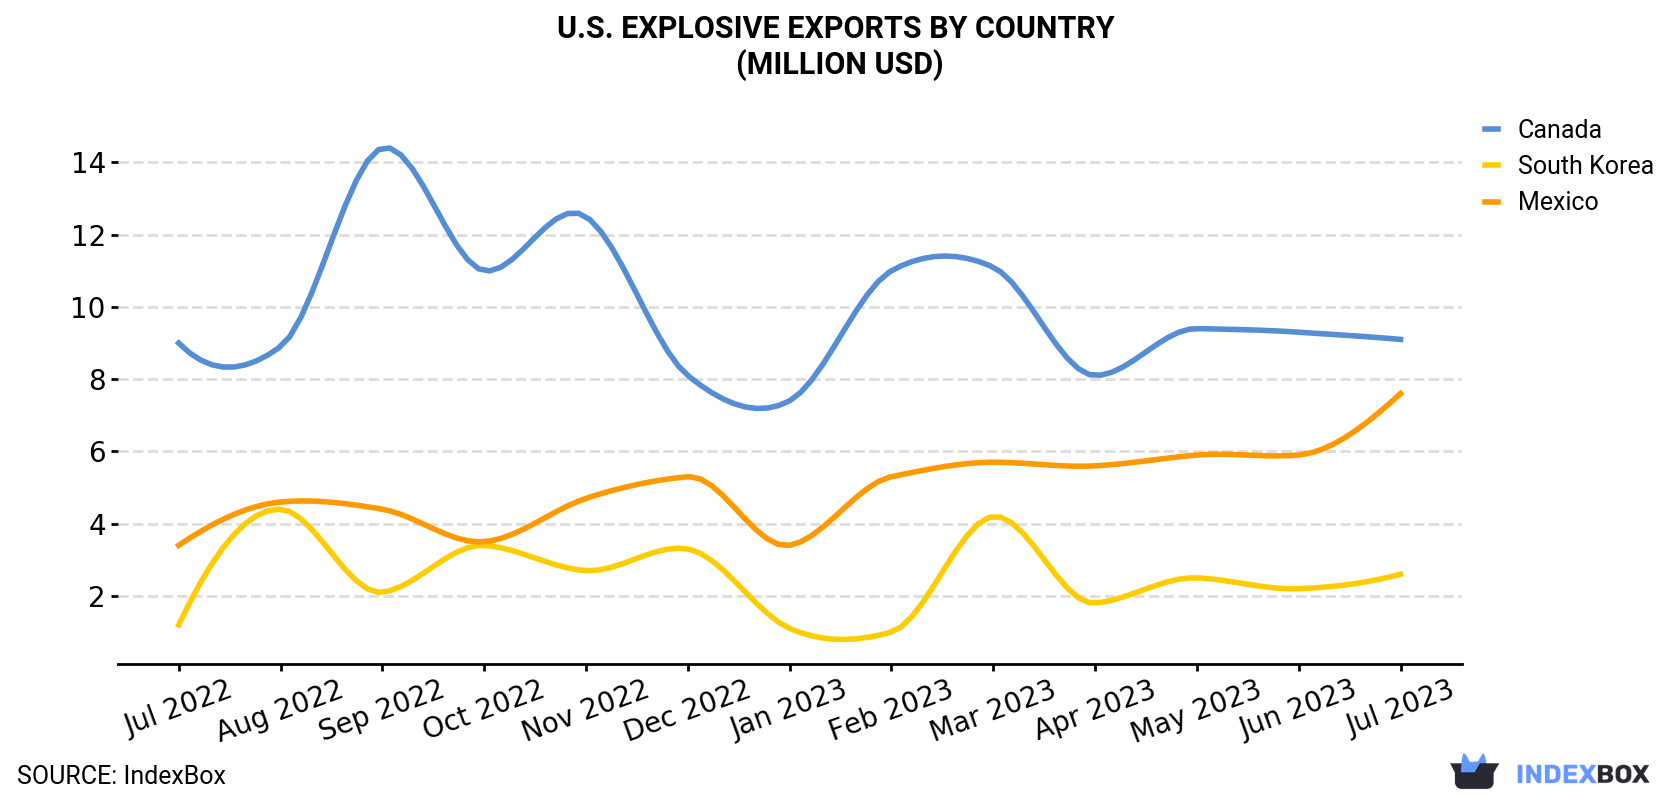 U.S. Explosive Exports By Country (Million USD)